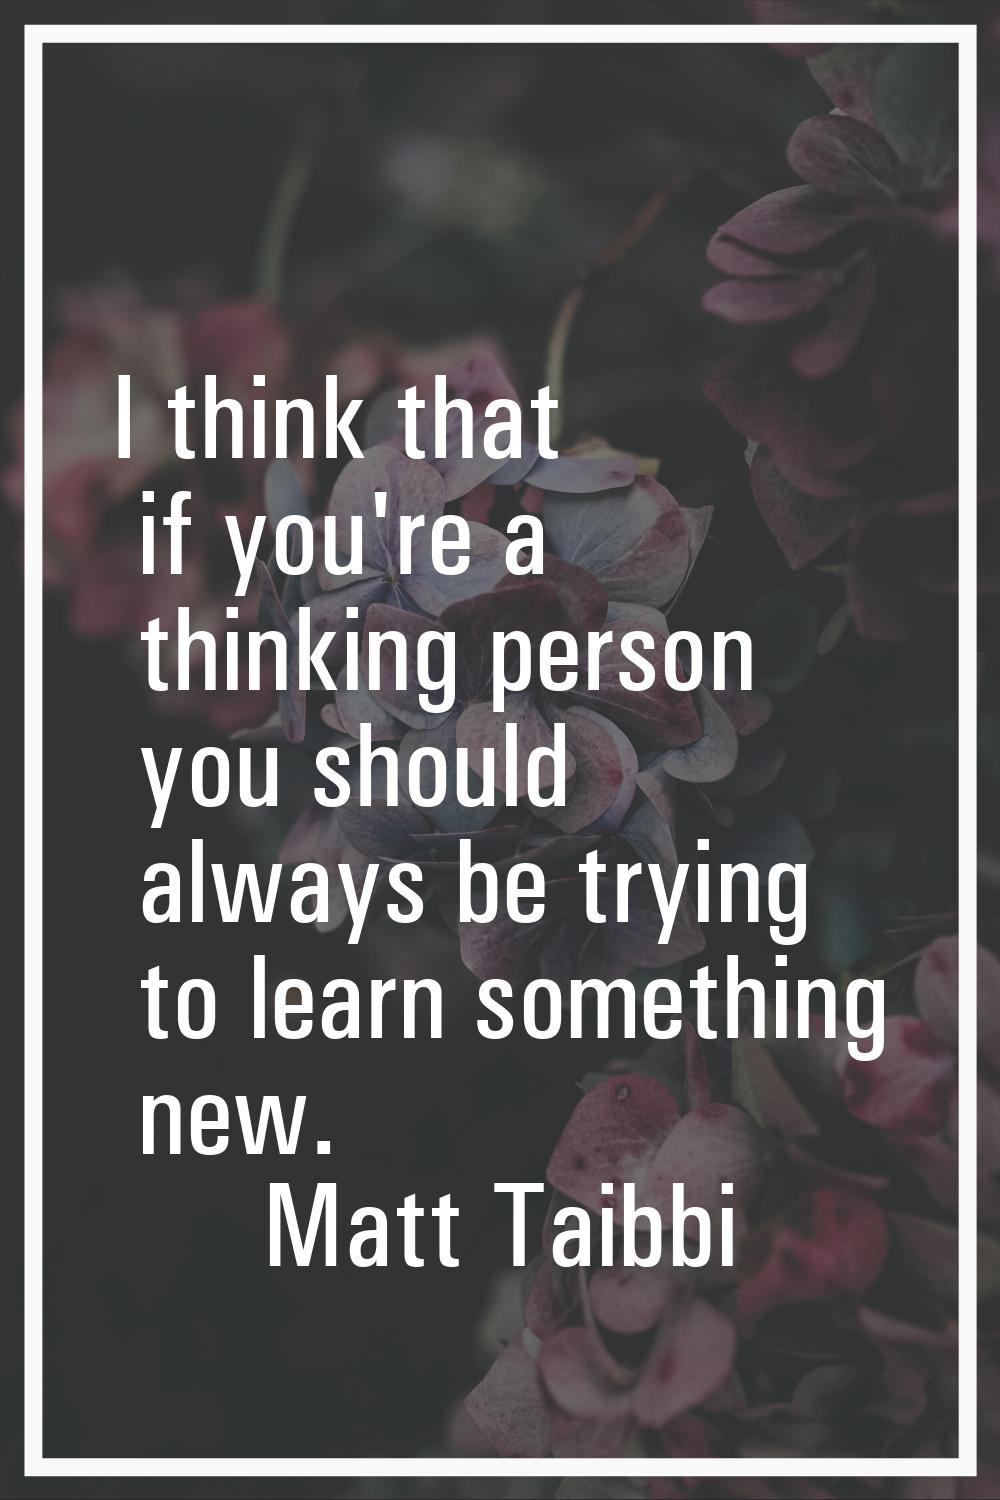 I think that if you're a thinking person you should always be trying to learn something new.